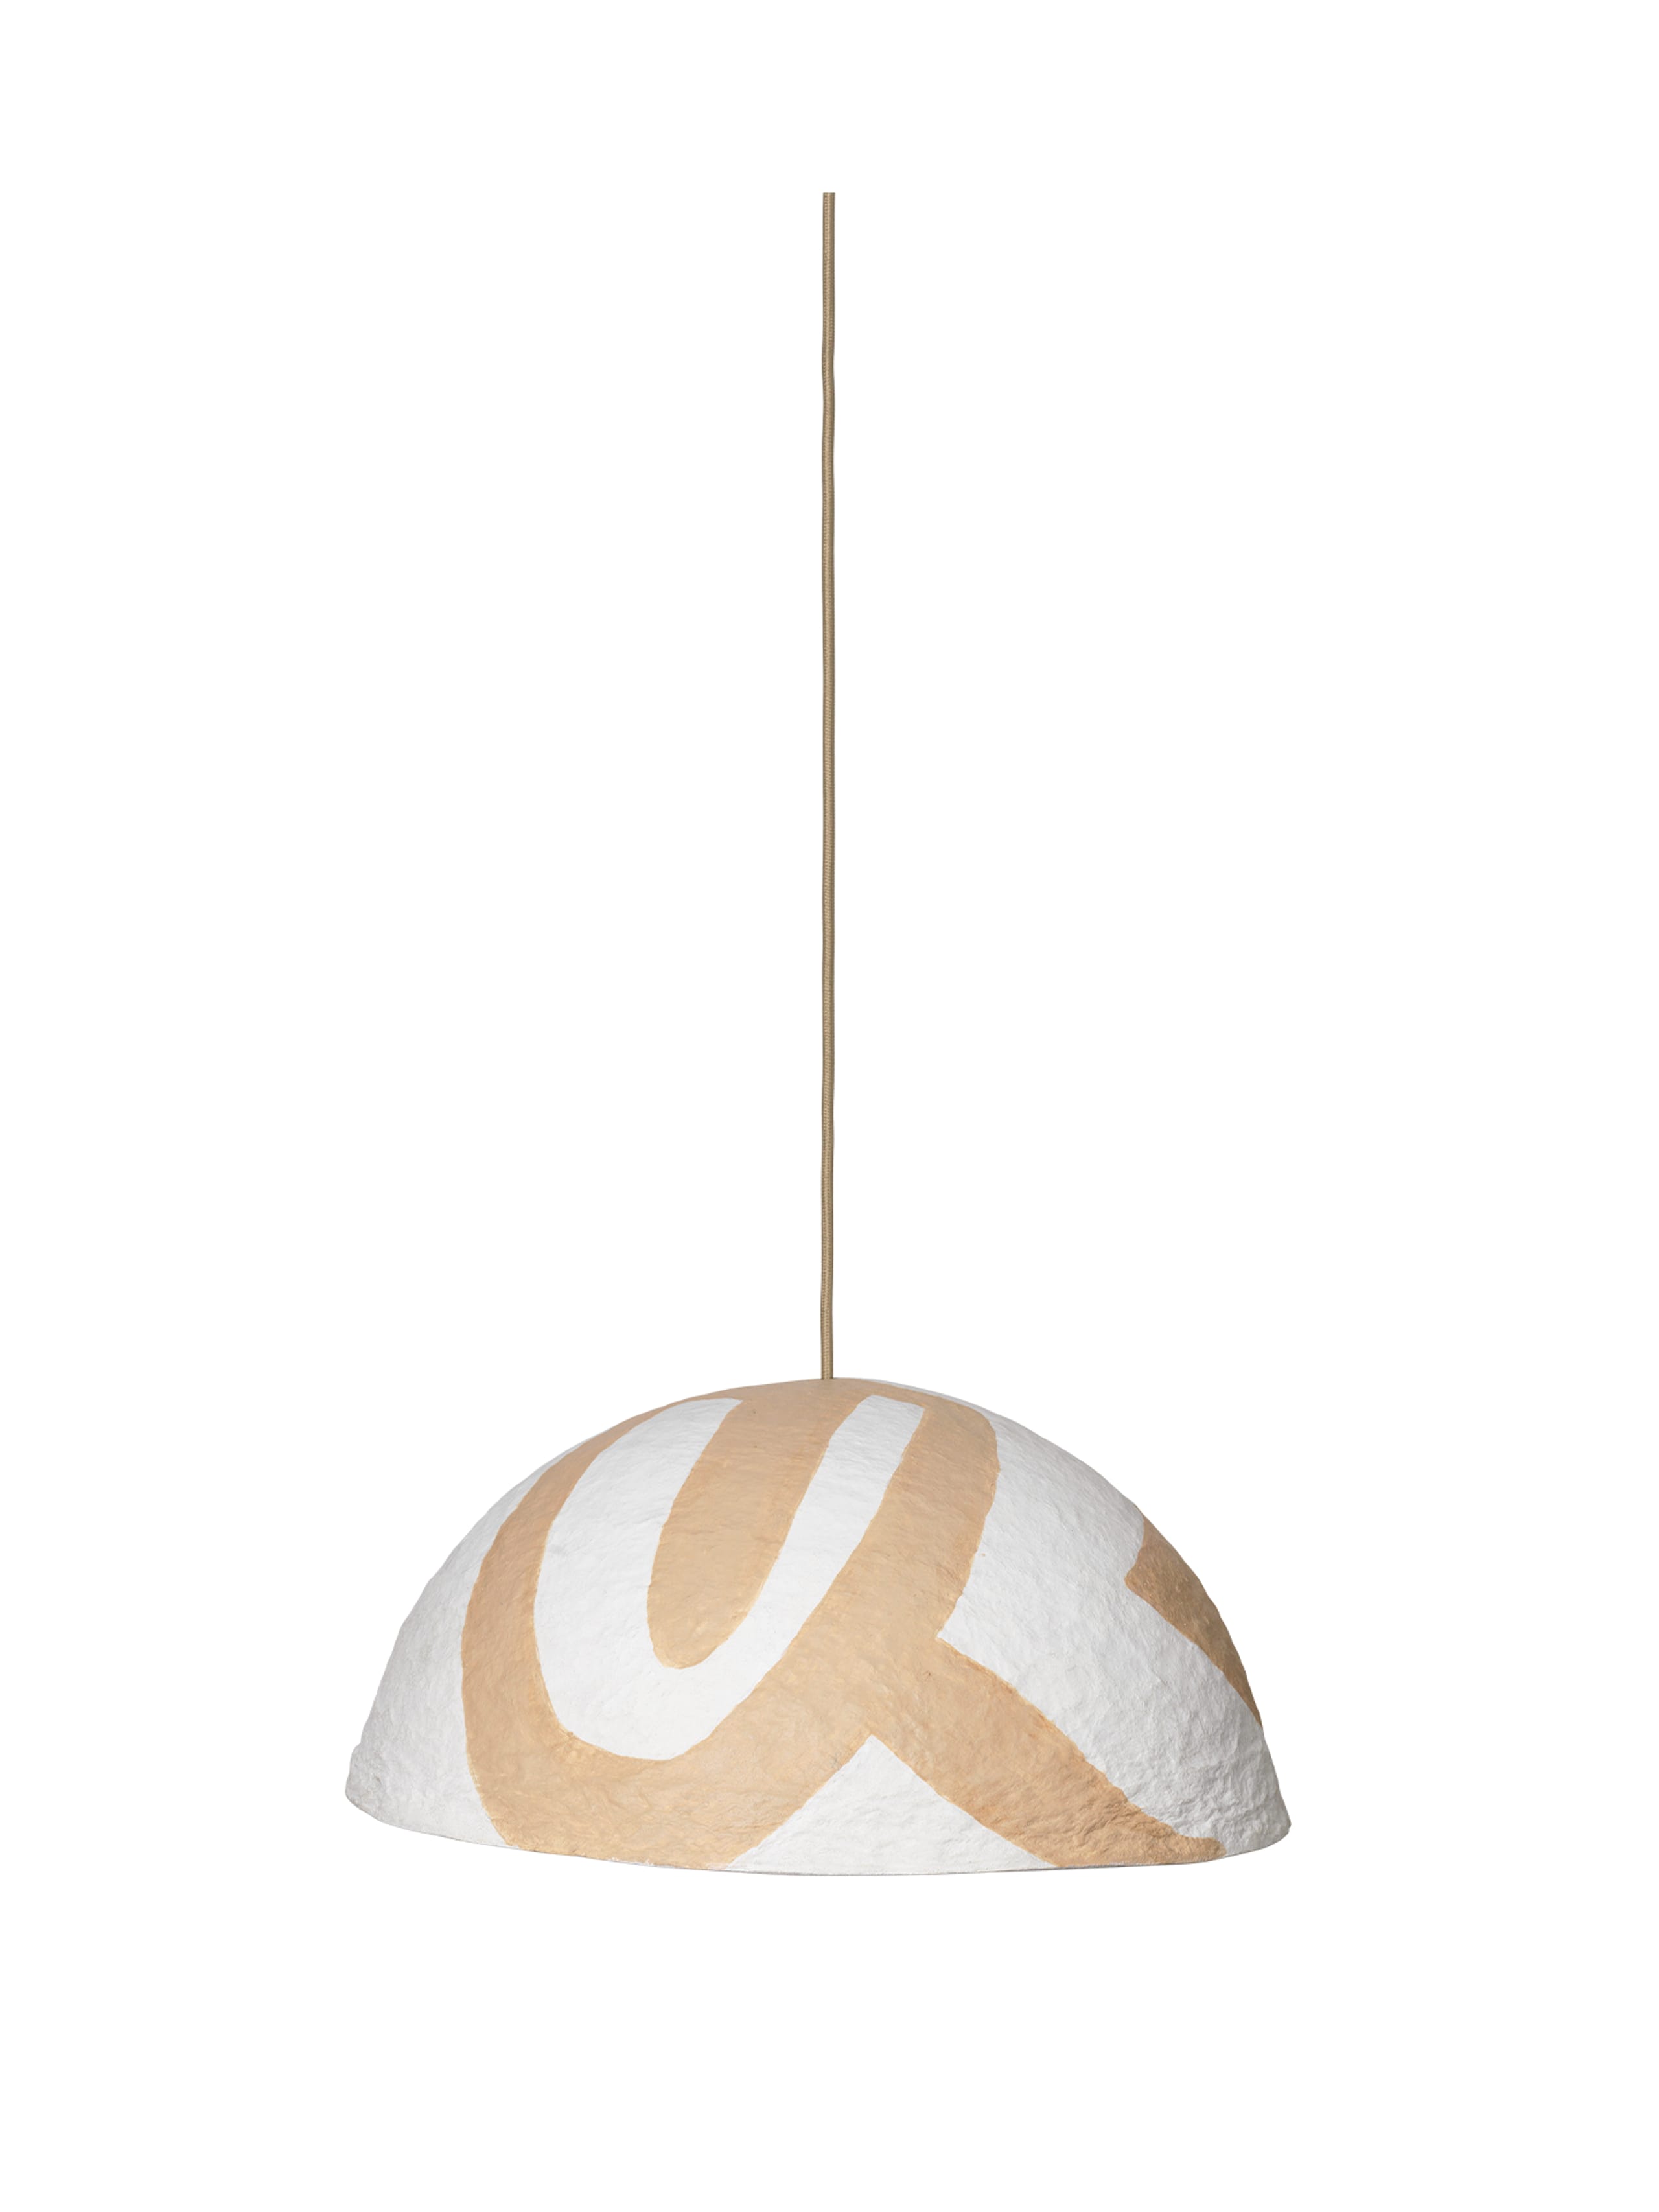 Ferm Living - Lampeskærm - Half Dome Lampshade - Half Dome Lampshade - Cave